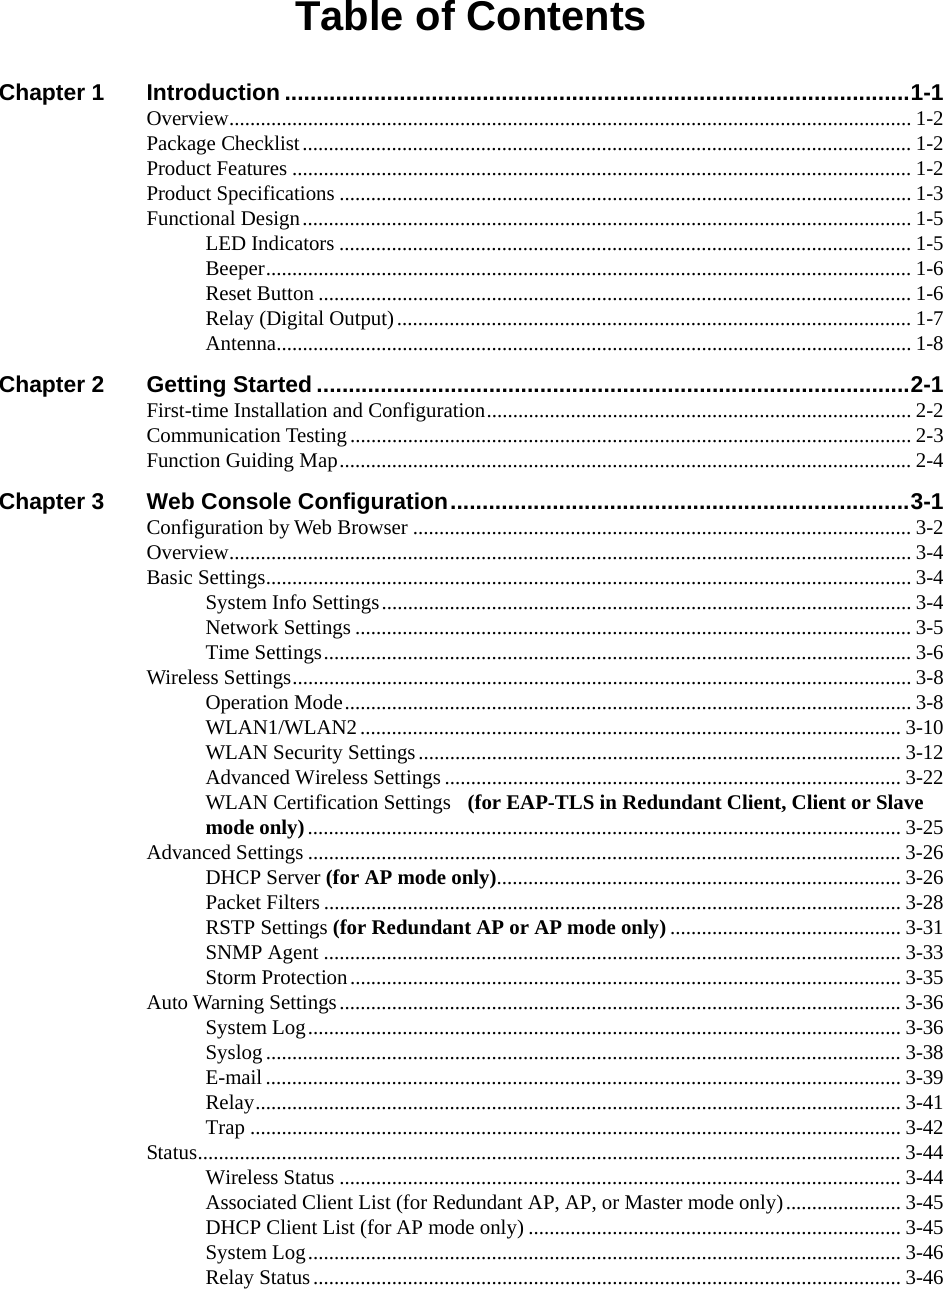  Table of Contents Chapter 1 Introduction ..................................................................................................1-1 Overview.................................................................................................................................. 1-2 Package Checklist.................................................................................................................... 1-2 Product Features ...................................................................................................................... 1-2 Product Specifications ............................................................................................................. 1-3 Functional Design.................................................................................................................... 1-5 LED Indicators ............................................................................................................. 1-5 Beeper........................................................................................................................... 1-6 Reset Button ................................................................................................................. 1-6 Relay (Digital Output).................................................................................................. 1-7 Antenna.........................................................................................................................1-8 Chapter 2 Getting Started .............................................................................................2-1 First-time Installation and Configuration................................................................................. 2-2 Communication Testing...........................................................................................................2-3 Function Guiding Map............................................................................................................. 2-4 Chapter 3 Web Console Configuration........................................................................3-1 Configuration by Web Browser ............................................................................................... 3-2 Overview.................................................................................................................................. 3-4 Basic Settings........................................................................................................................... 3-4 System Info Settings..................................................................................................... 3-4 Network Settings .......................................................................................................... 3-5 Time Settings................................................................................................................ 3-6 Wireless Settings...................................................................................................................... 3-8 Operation Mode............................................................................................................ 3-8 WLAN1/WLAN2....................................................................................................... 3-10 WLAN Security Settings............................................................................................ 3-12 Advanced Wireless Settings....................................................................................... 3-22 WLAN Certification Settings  (for EAP-TLS in Redundant Client, Client or Slave mode only)................................................................................................................. 3-25 Advanced Settings ................................................................................................................. 3-26 DHCP Server (for AP mode only)............................................................................. 3-26 Packet Filters .............................................................................................................. 3-28 RSTP Settings (for Redundant AP or AP mode only) ............................................ 3-31 SNMP Agent .............................................................................................................. 3-33 Storm Protection......................................................................................................... 3-35 Auto Warning Settings...........................................................................................................3-36 System Log................................................................................................................. 3-36 Syslog ......................................................................................................................... 3-38 E-mail ......................................................................................................................... 3-39 Relay...........................................................................................................................3-41 Trap ............................................................................................................................3-42 Status...................................................................................................................................... 3-44 Wireless Status ........................................................................................................... 3-44 Associated Client List (for Redundant AP, AP, or Master mode only)...................... 3-45 DHCP Client List (for AP mode only) ....................................................................... 3-45 System Log................................................................................................................. 3-46 Relay Status................................................................................................................ 3-46 